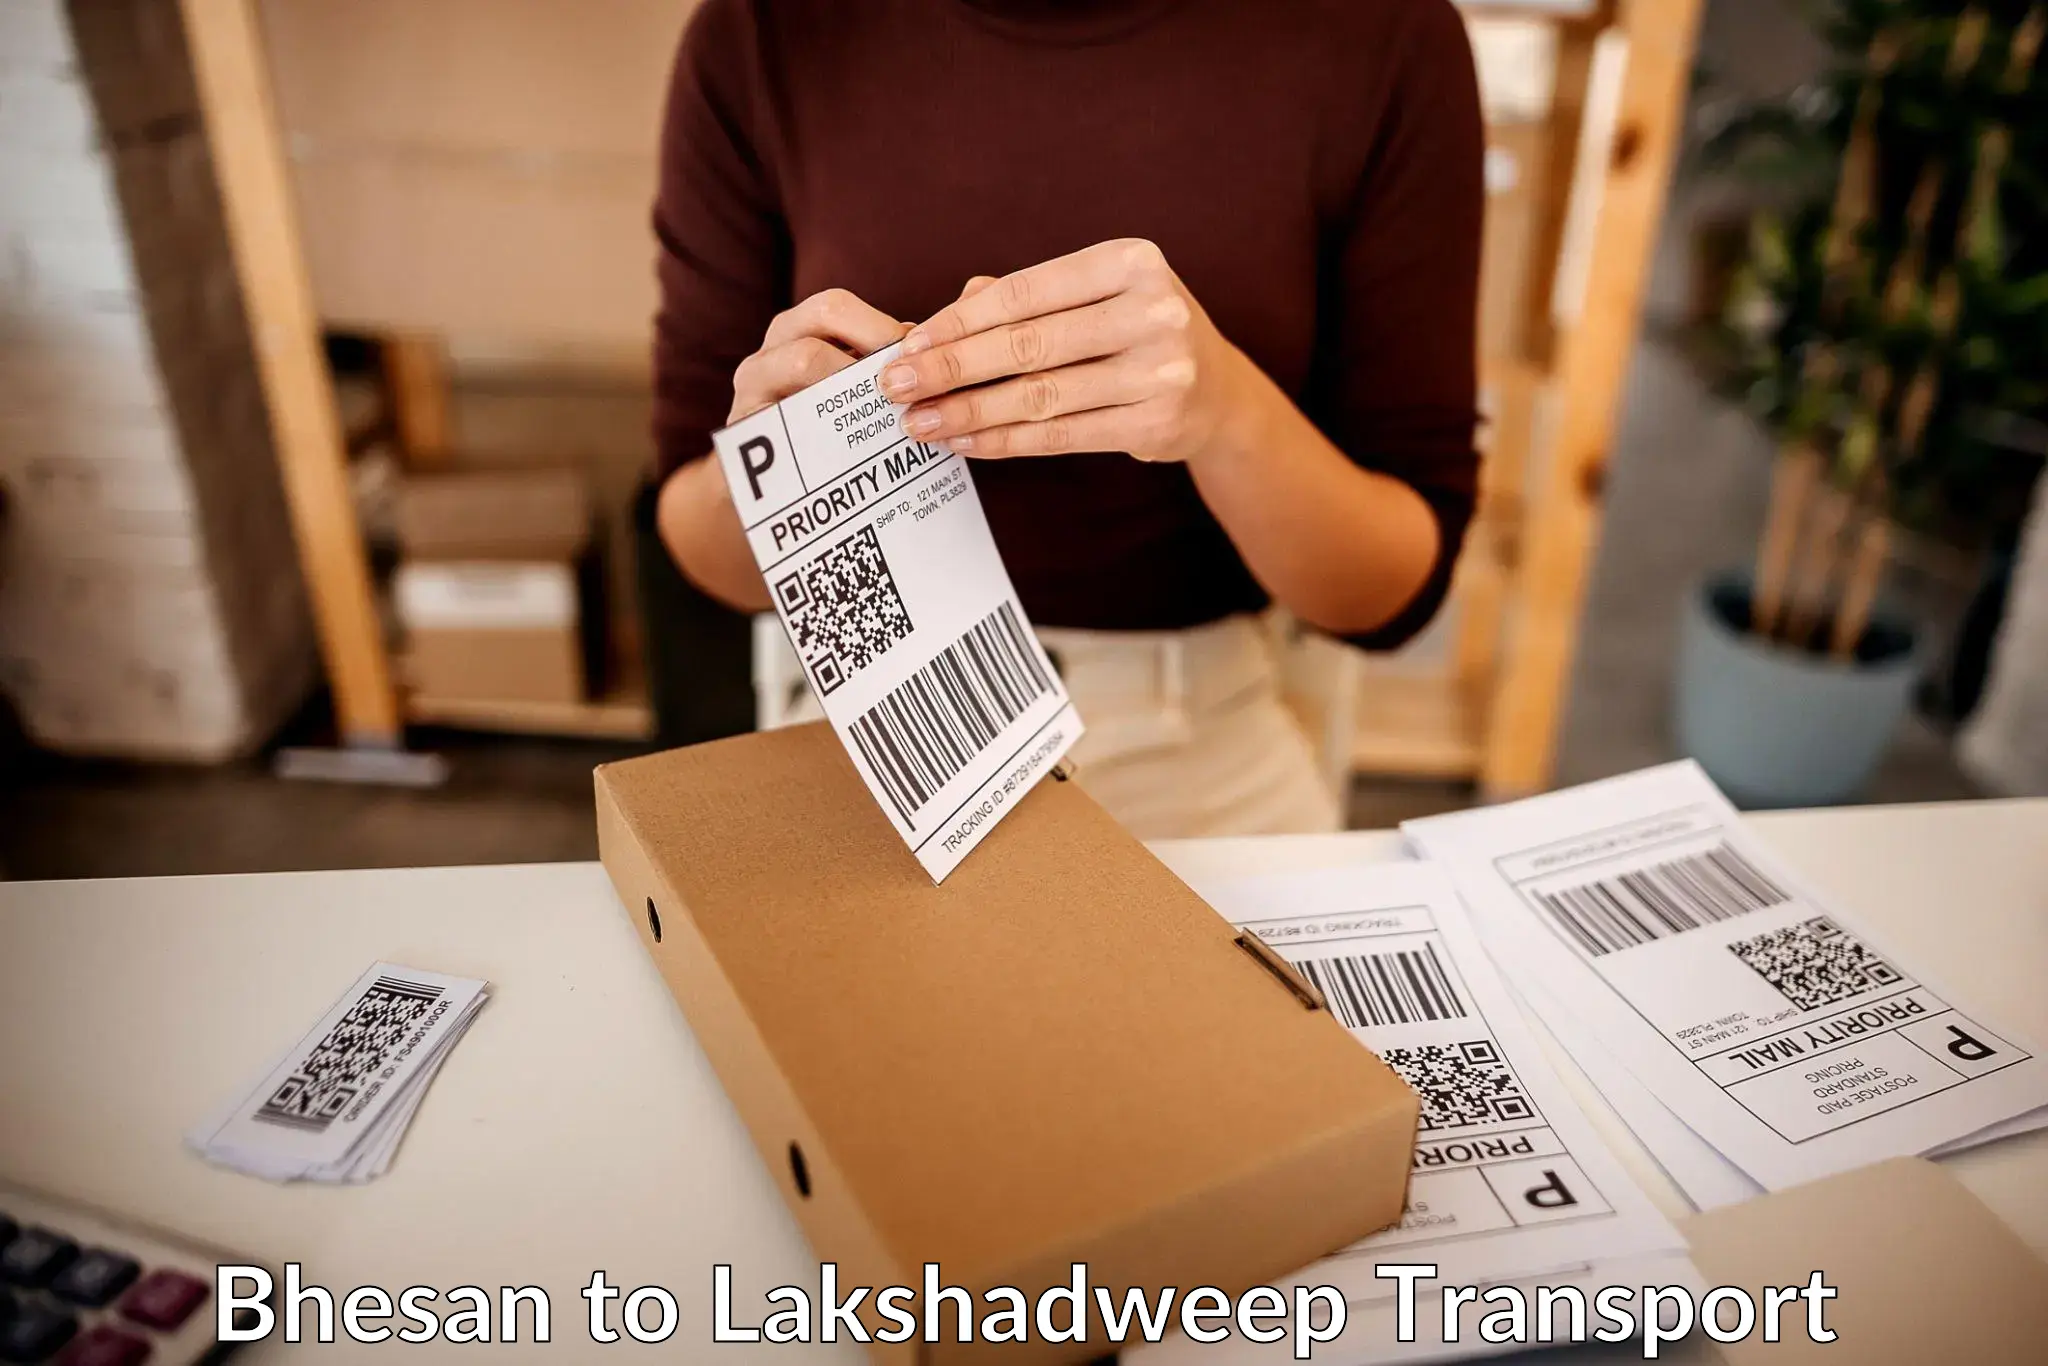 Goods transport services in Bhesan to Lakshadweep